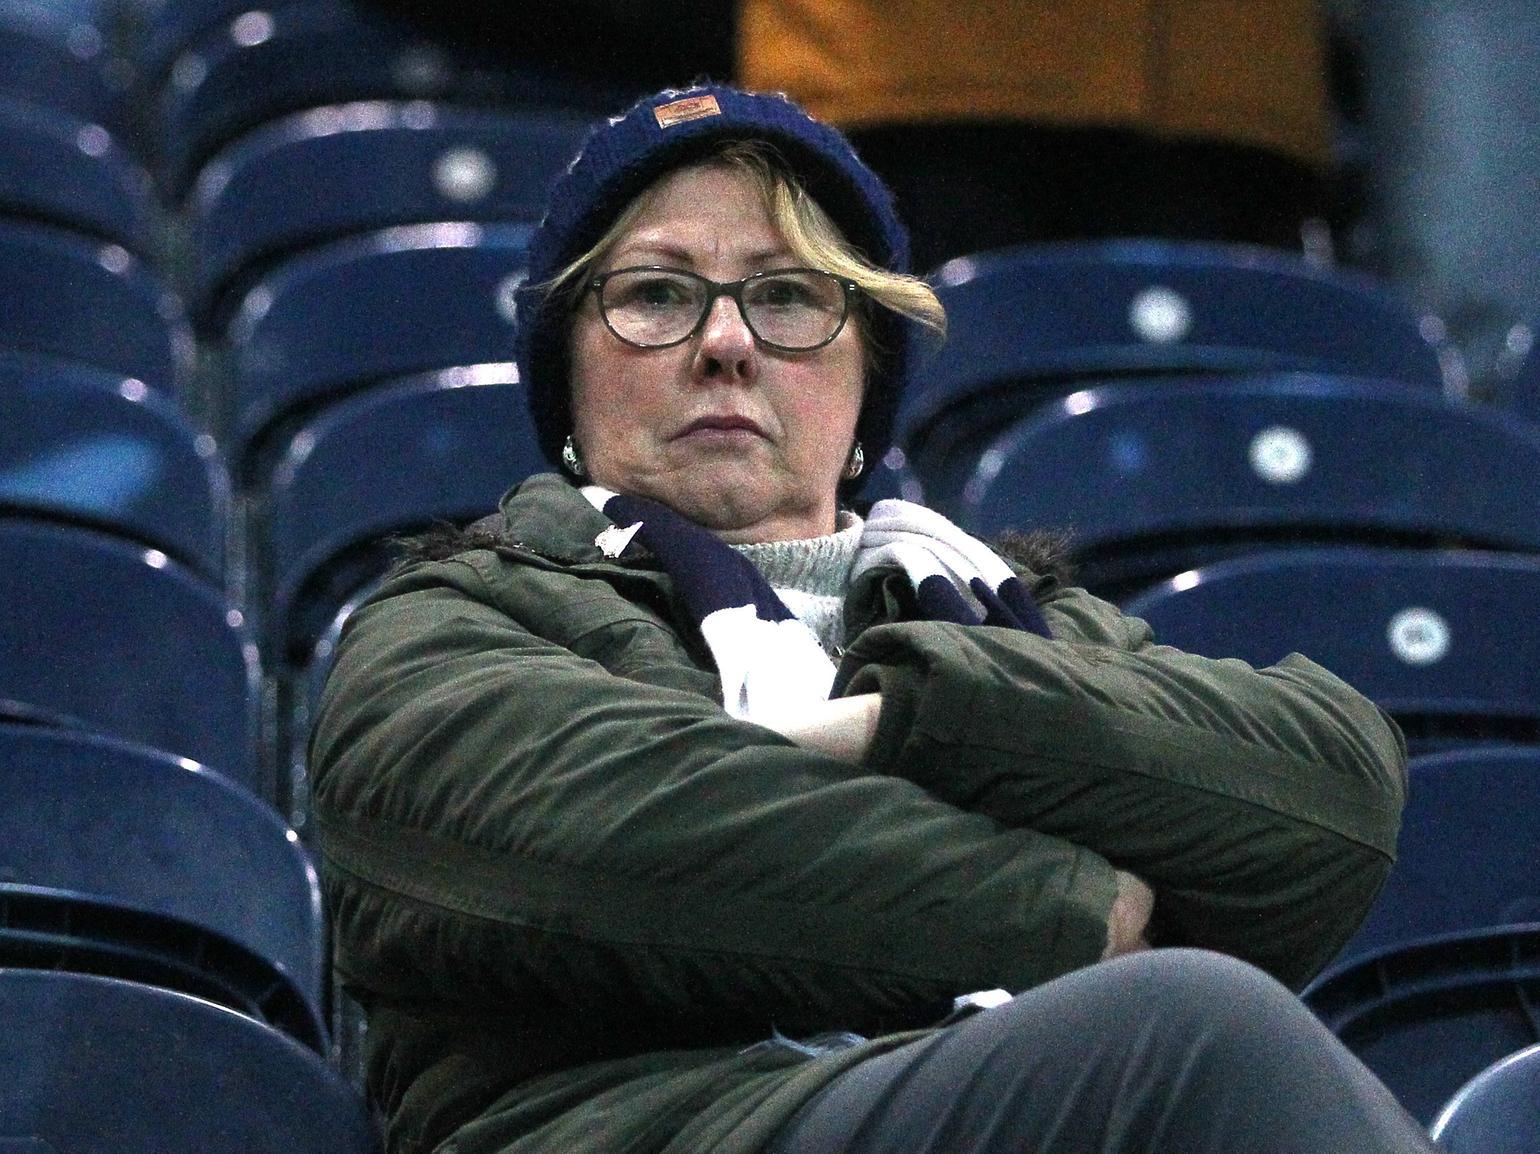 This North End fan looks stern faced as they wait for the game.